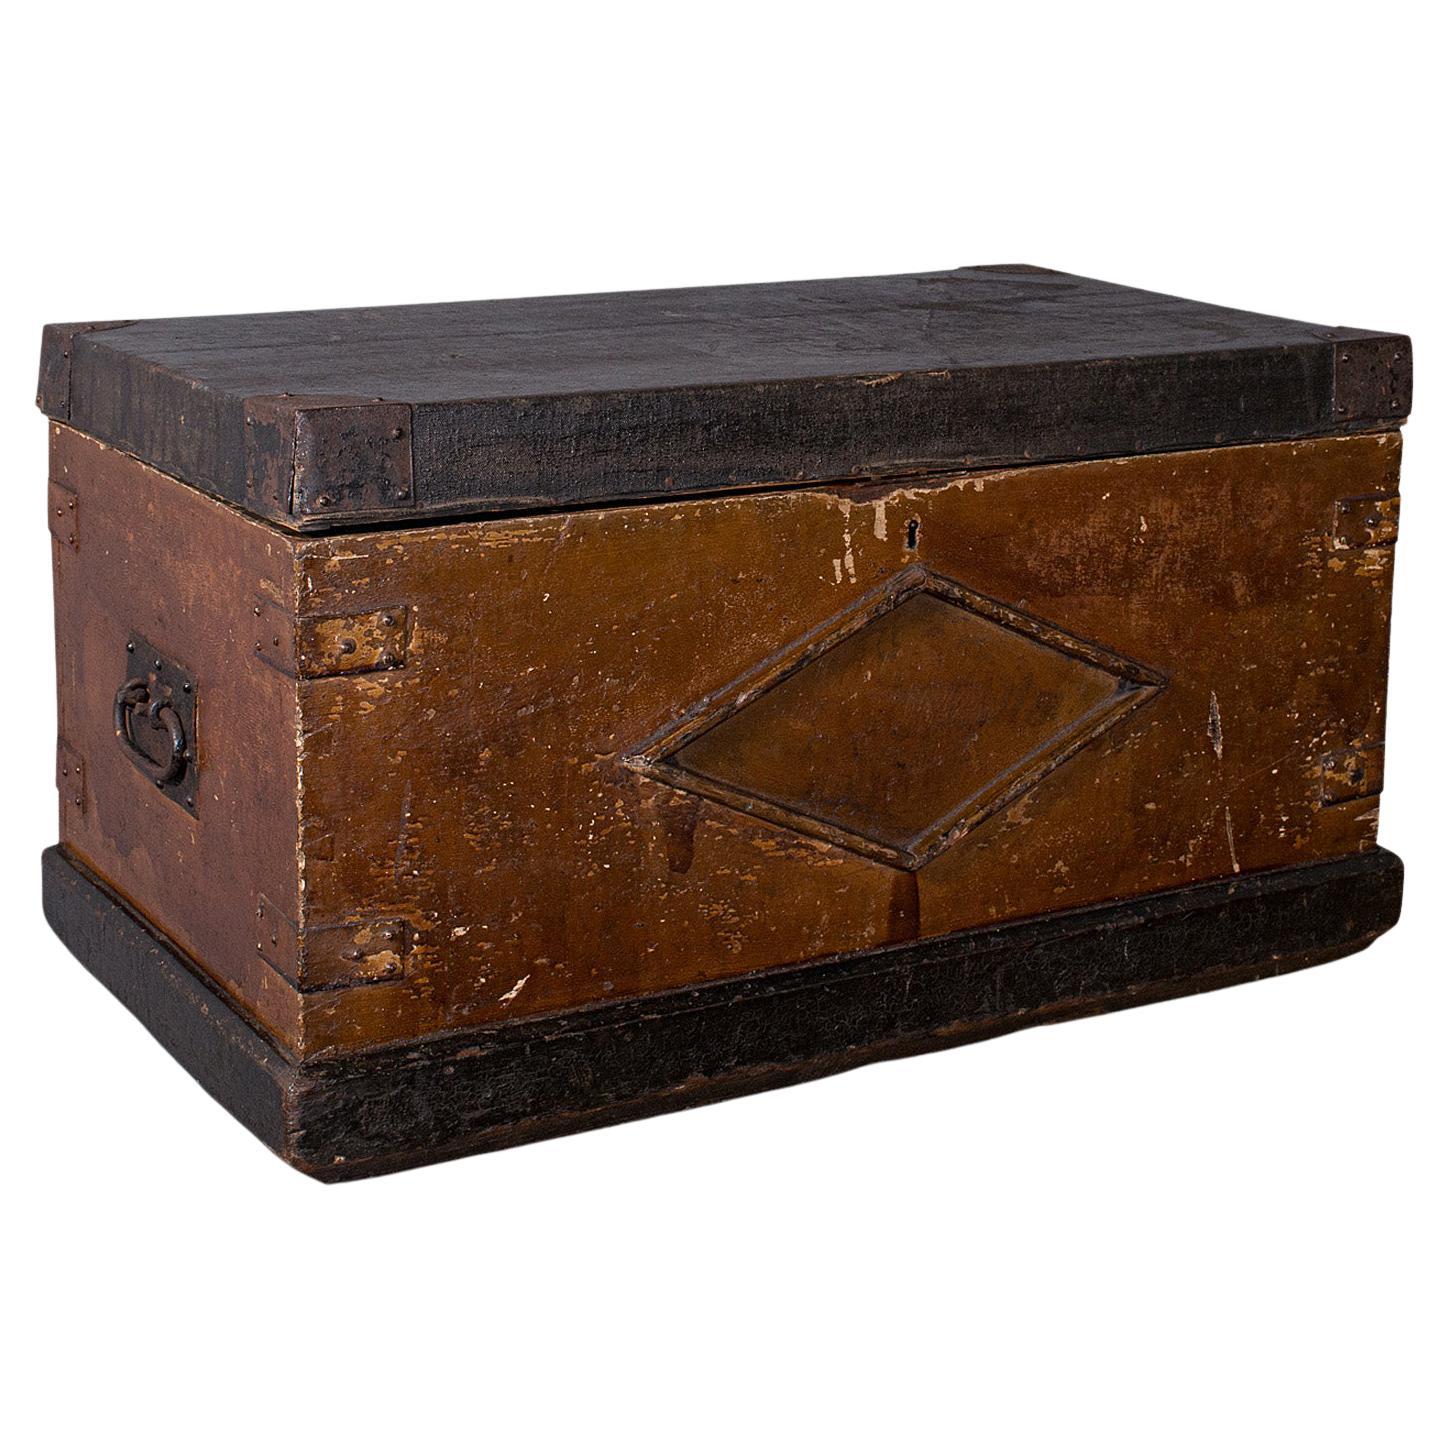 Antique Craftsman's Trunk, English, Carpentry, Maritime, Tool Chest, Victorian For Sale